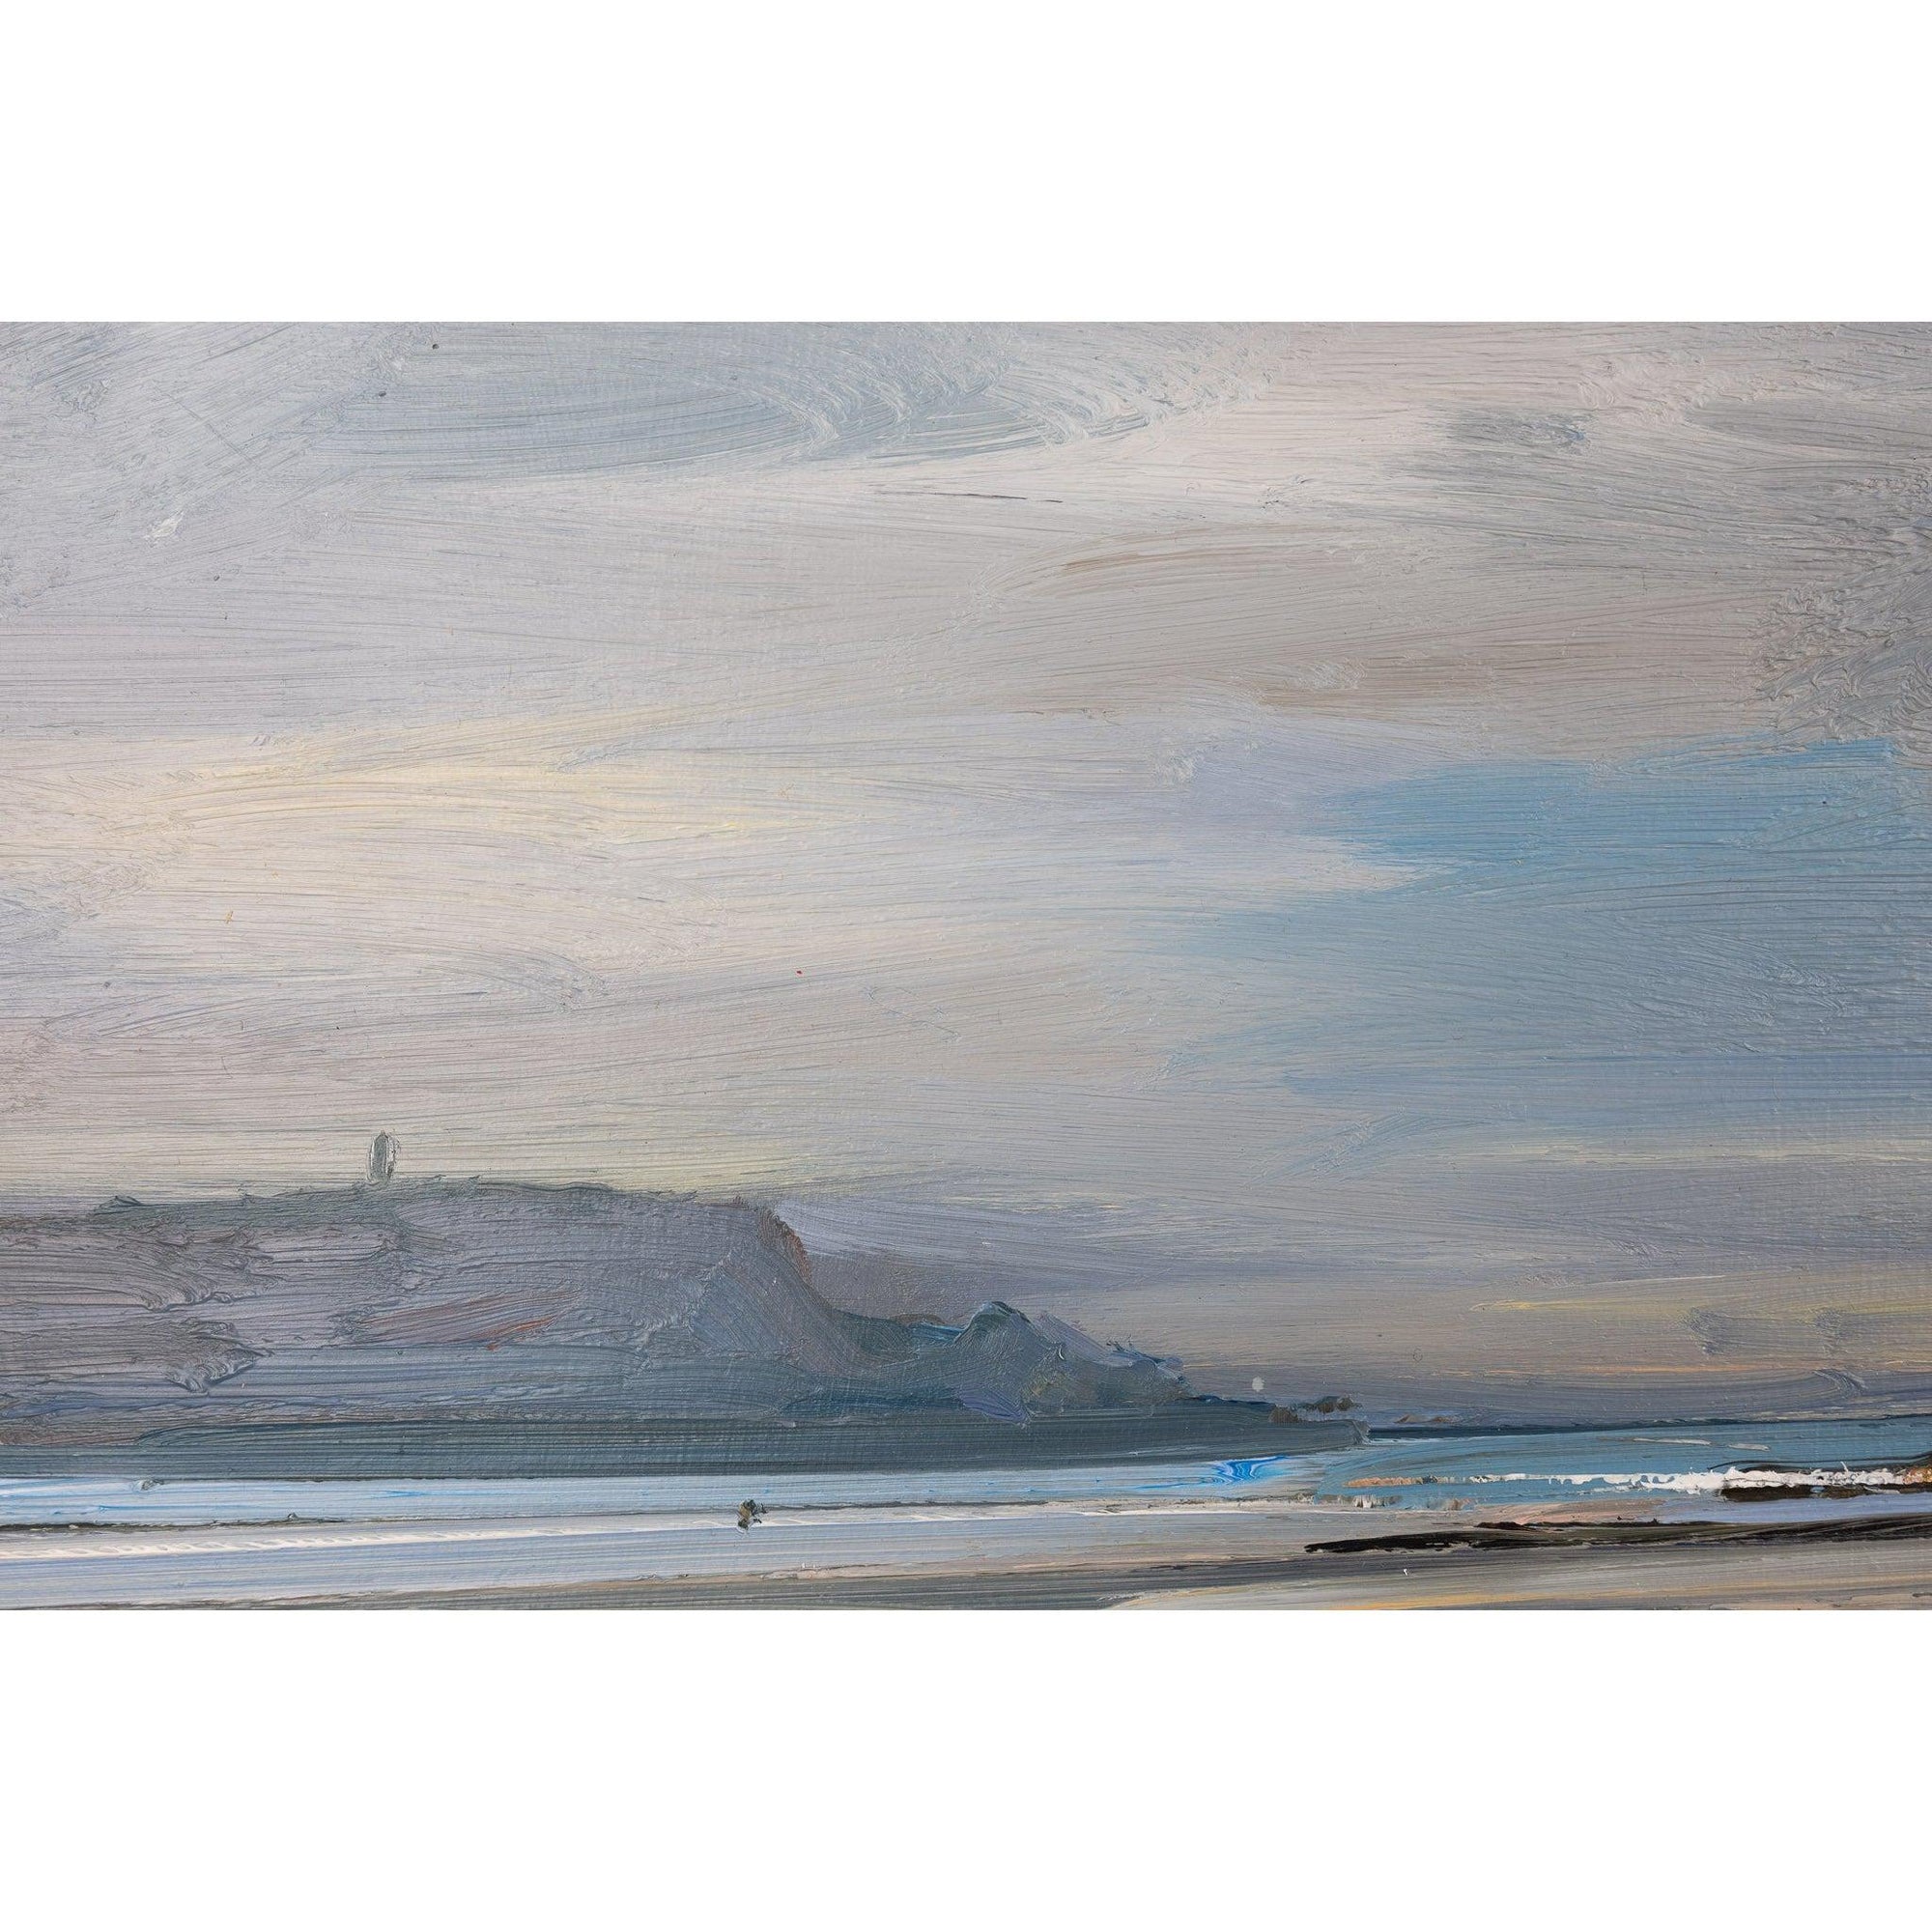 'Evening Light, Daymer Bay' oil on board by David Atkins, fine art, available at Padstow Gallery, Cornwall